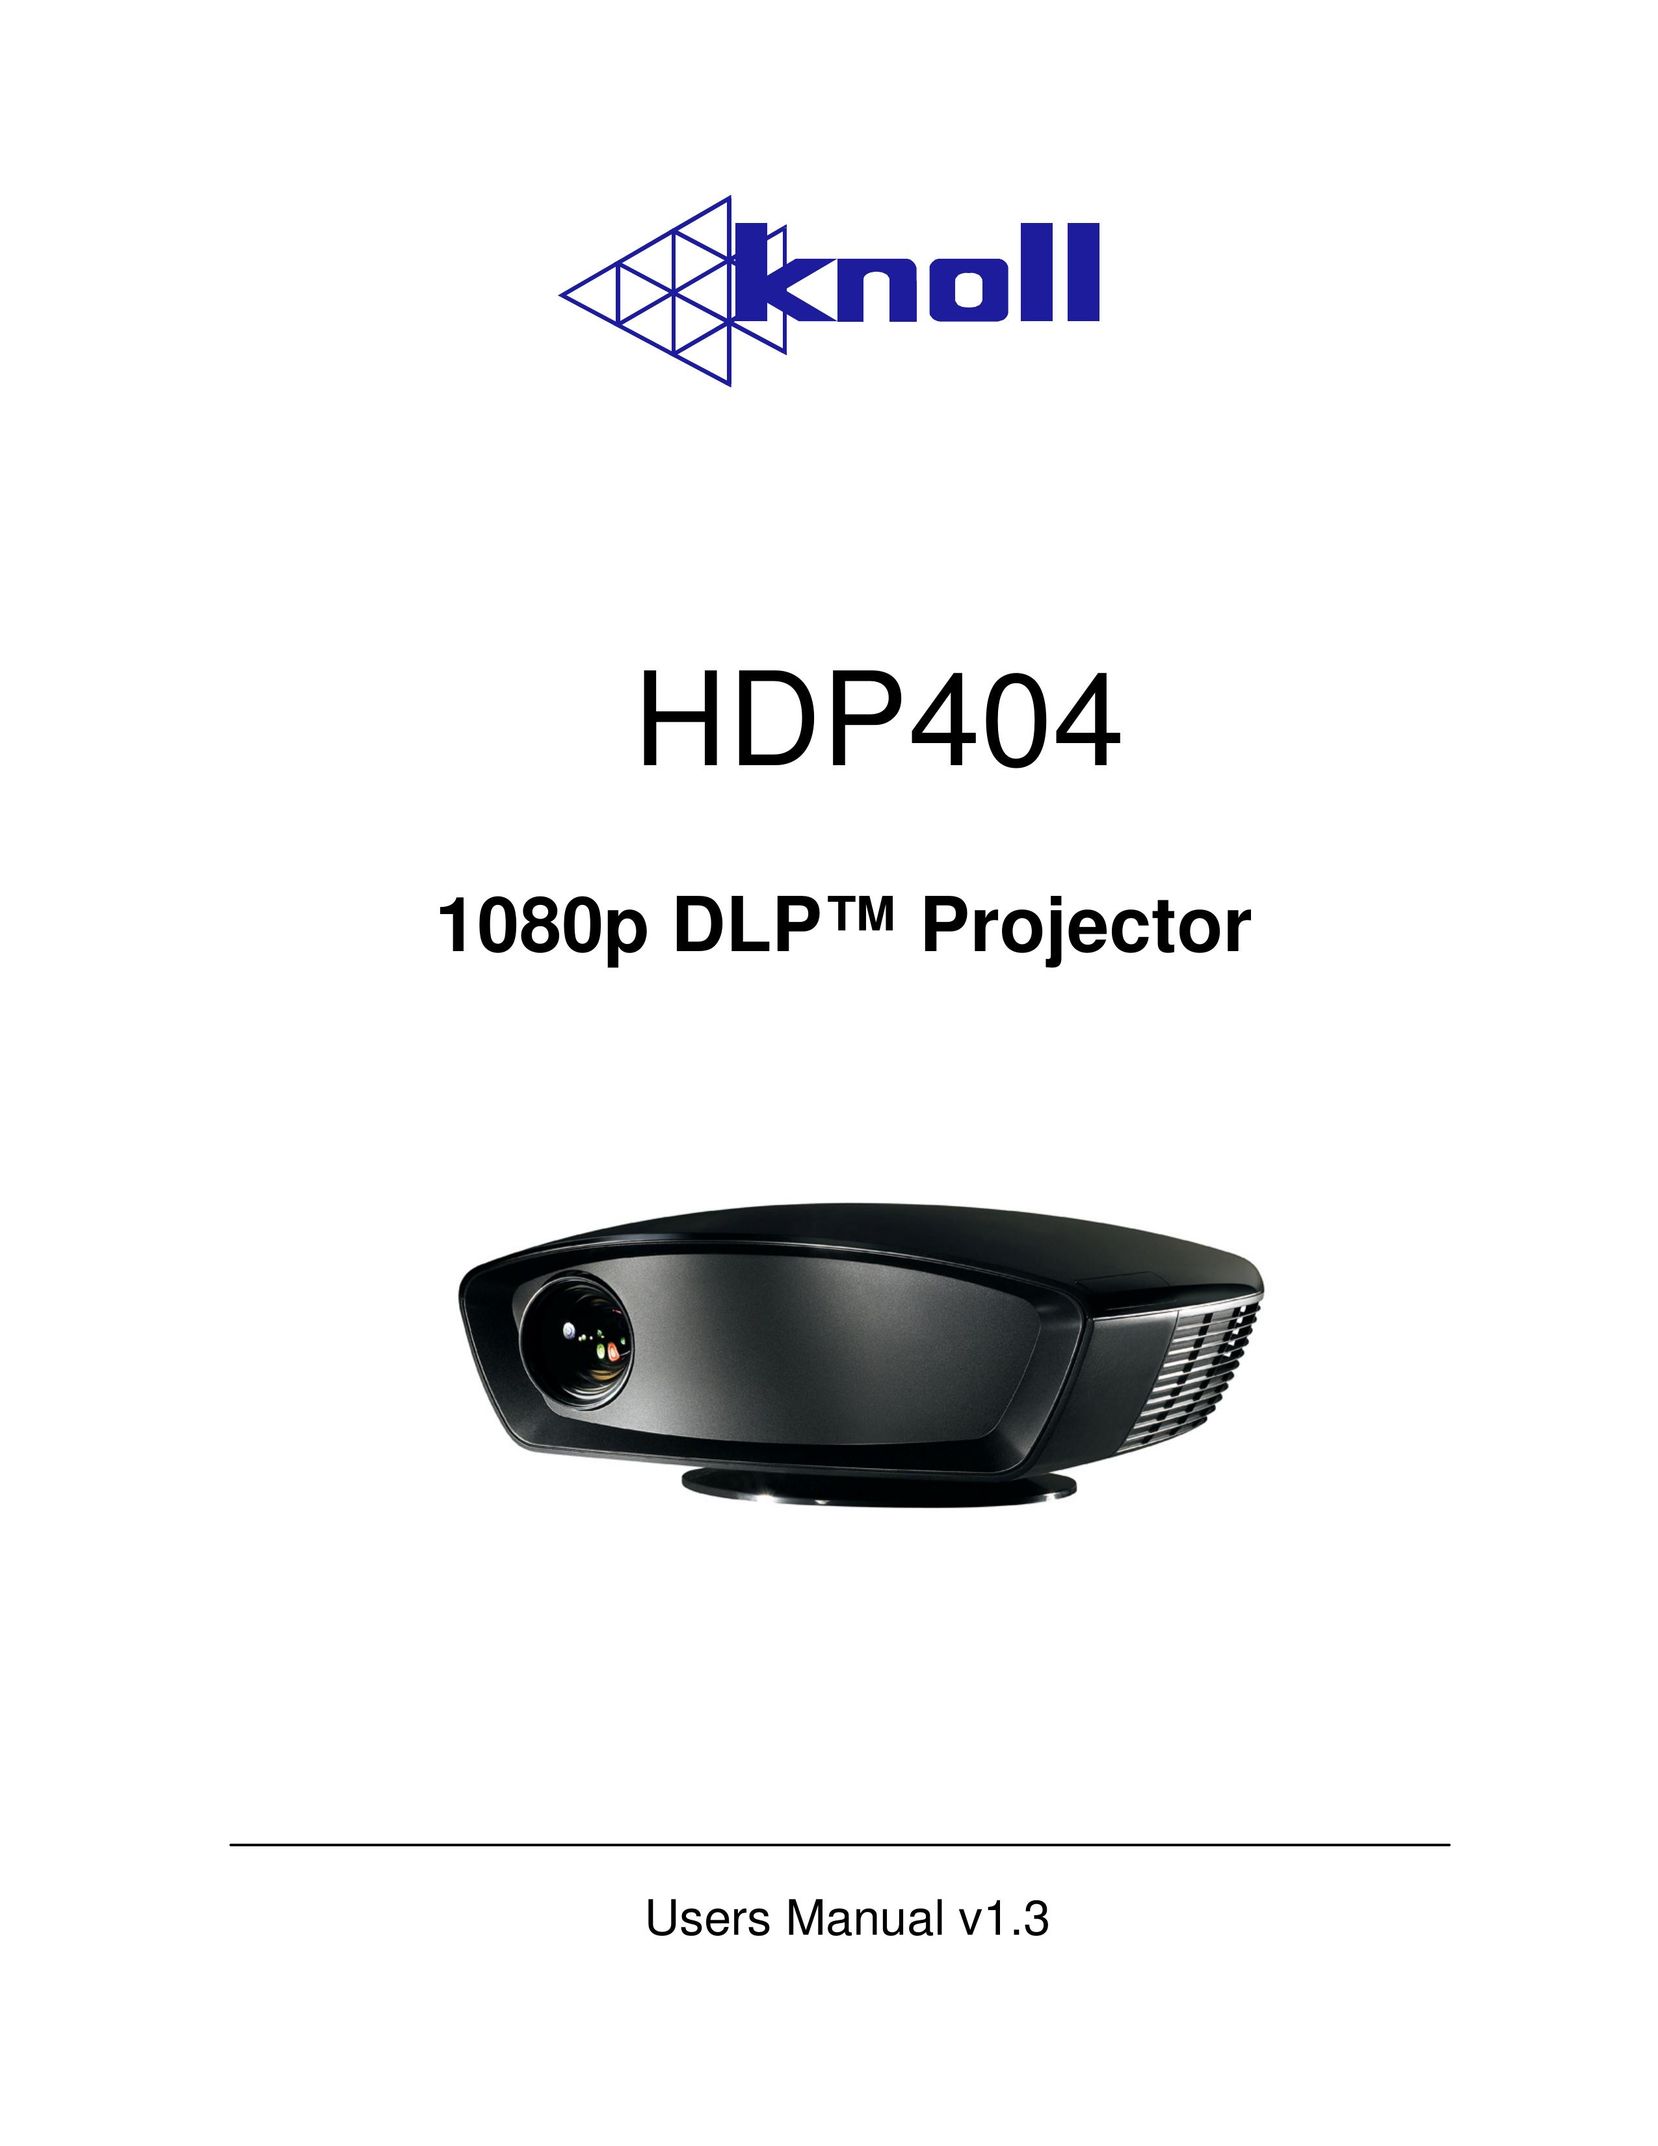 Knoll Systems HDP404 Projector User Manual